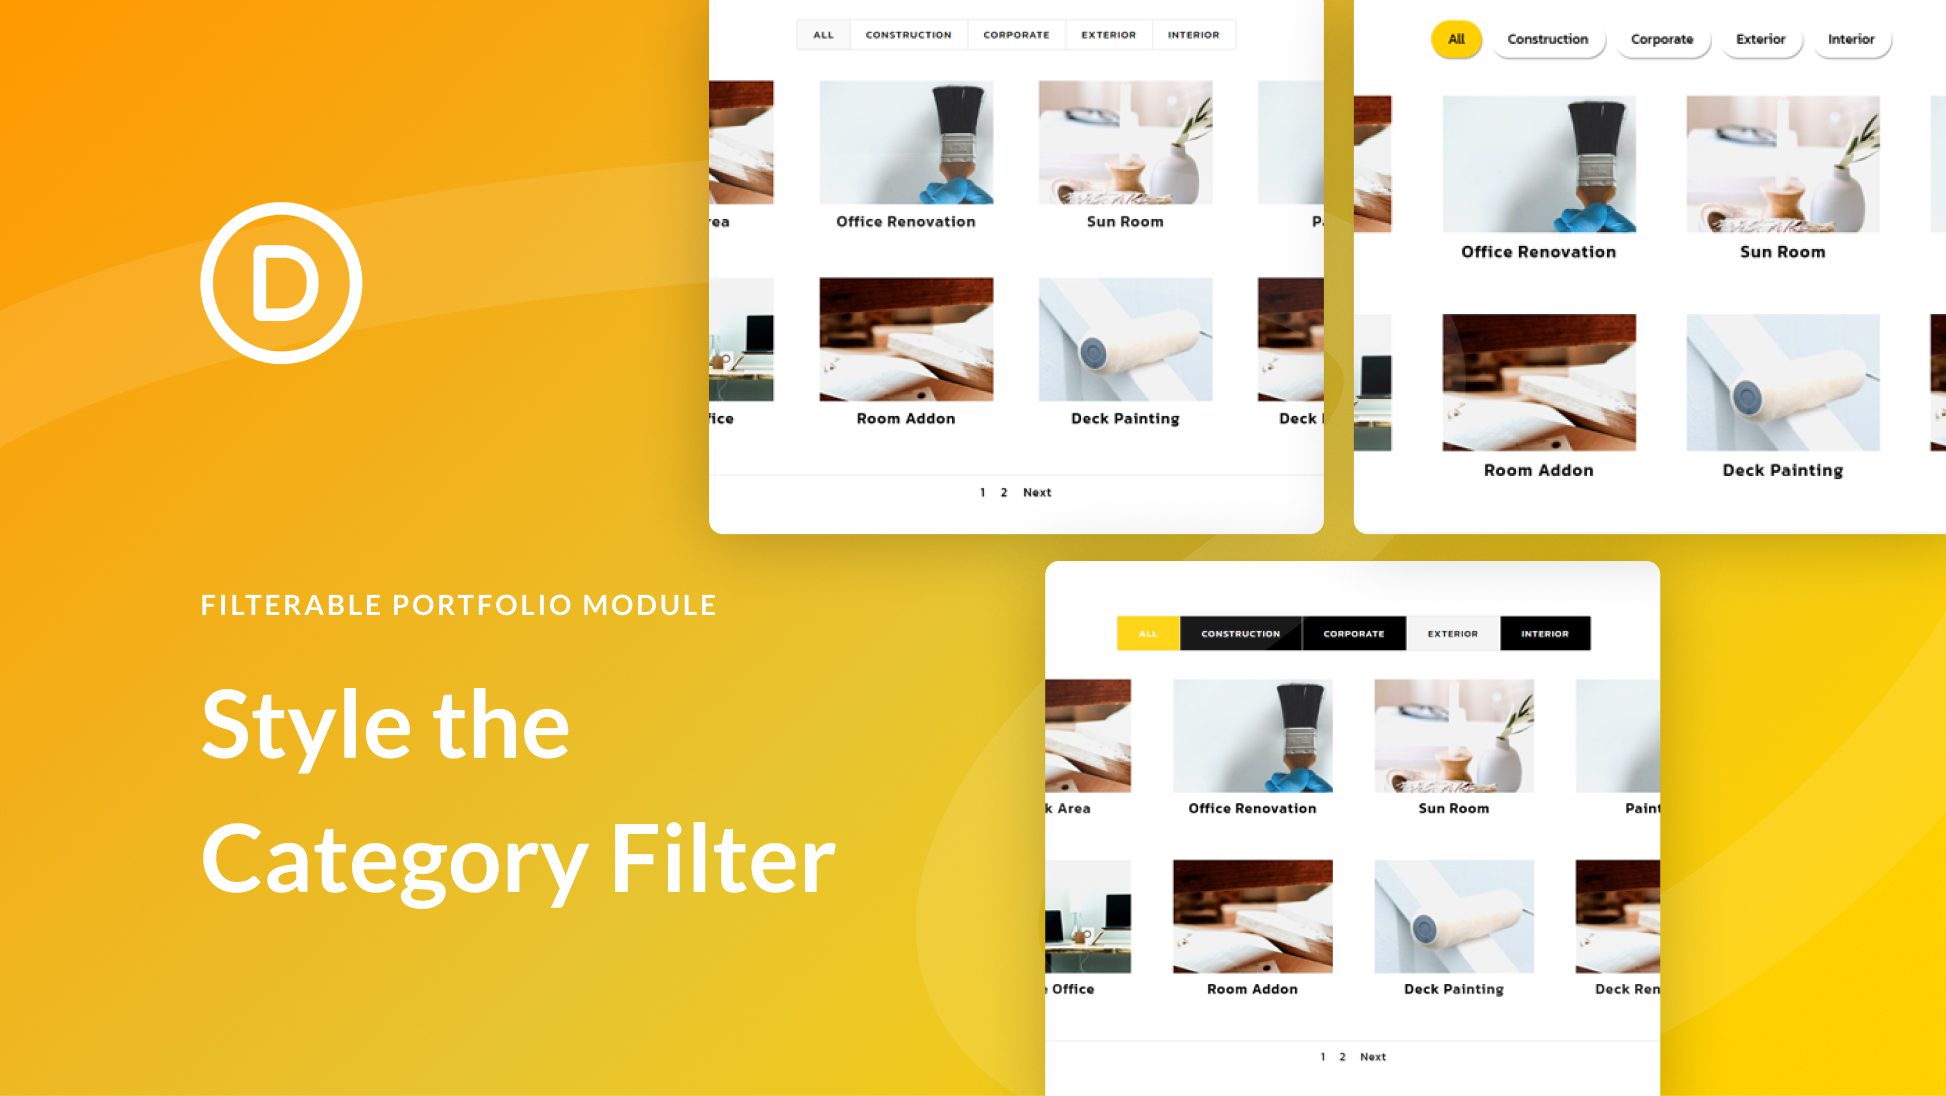 How to Style the Category Filter in Divi’s Filterable Portfolio Module